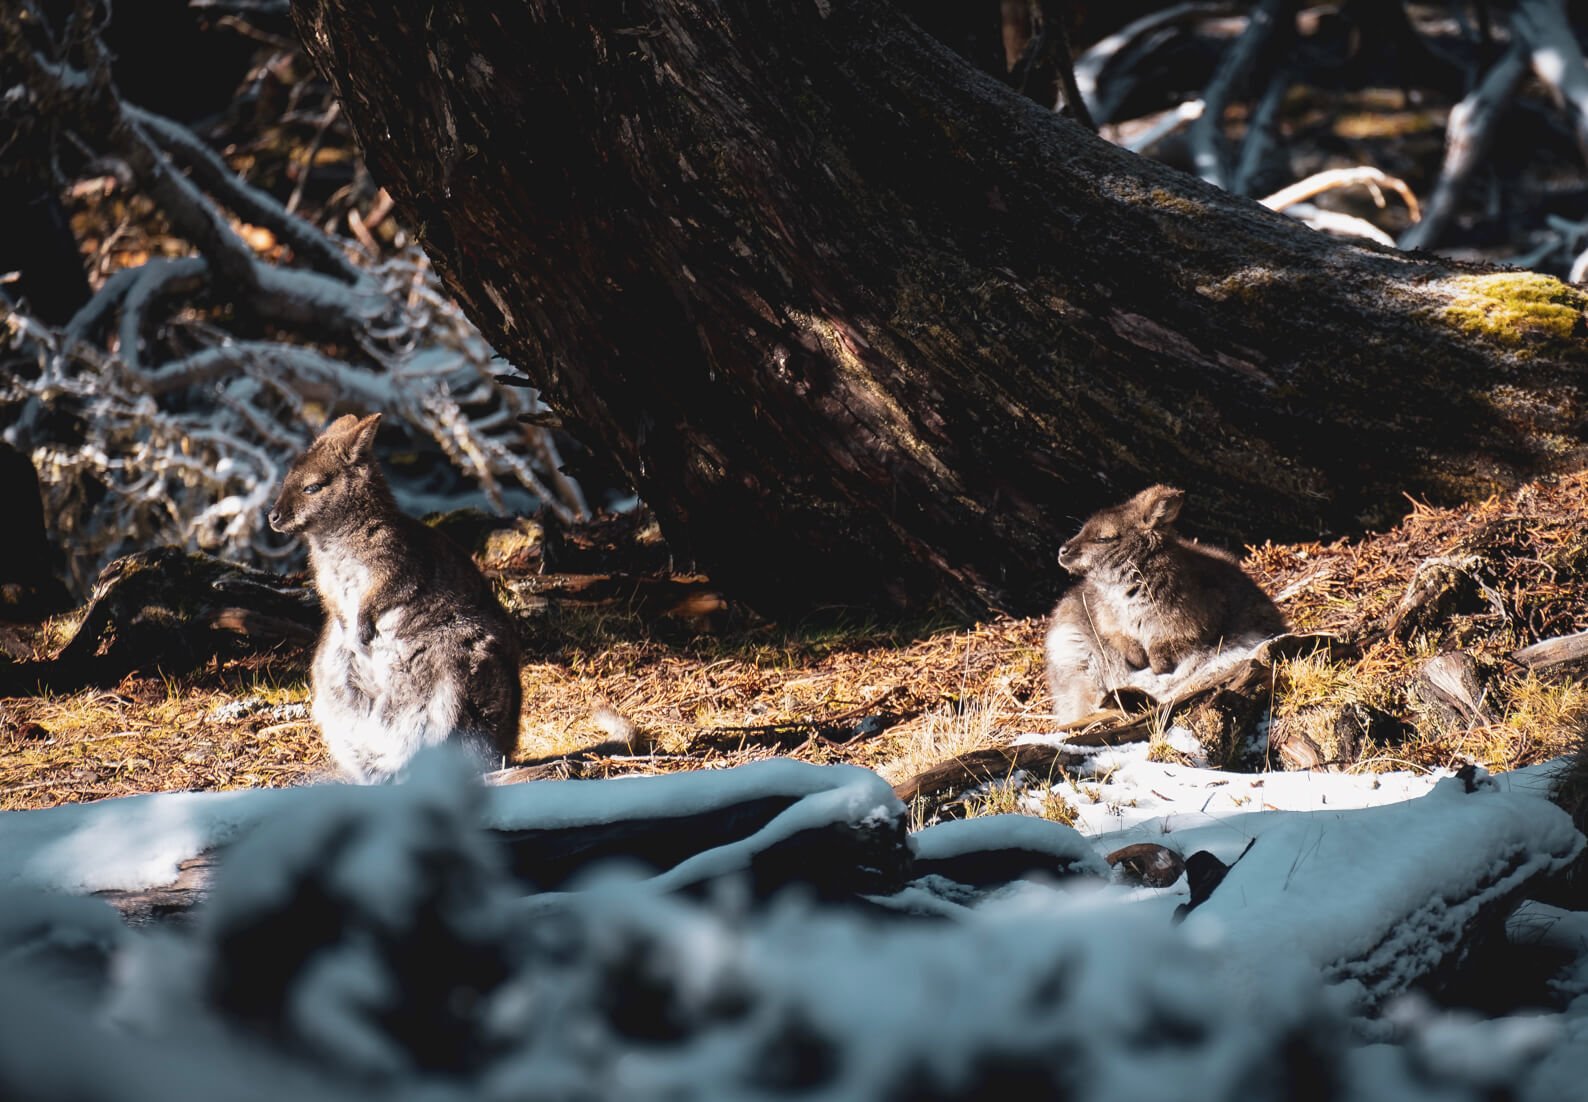 Two fluffy wallabies in The Walls of Jerusalem National Park during Tasmania's winter